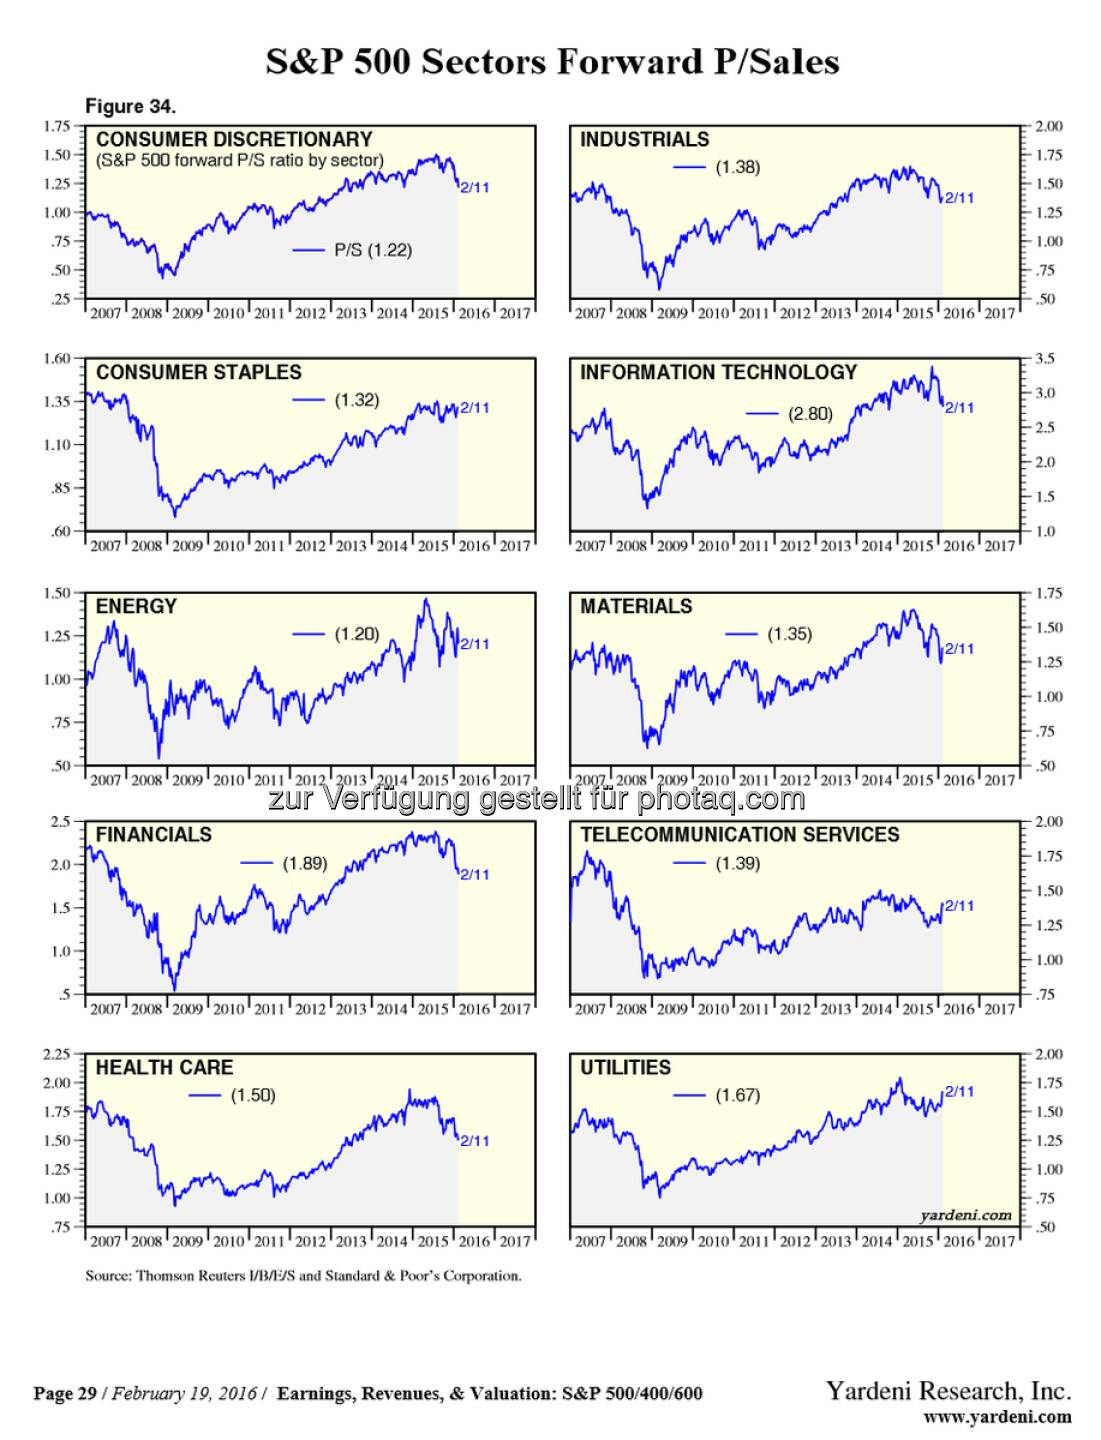 The valuations of each sector. Based on Price-to-Sales.

Great share via: https://t.co/j9C2qTVc87

$SPY $AAPL $CELG http://twitter.com/StockTwits/status/701468108834230272/photo/1  Source: http://twitter.com/StockTwits